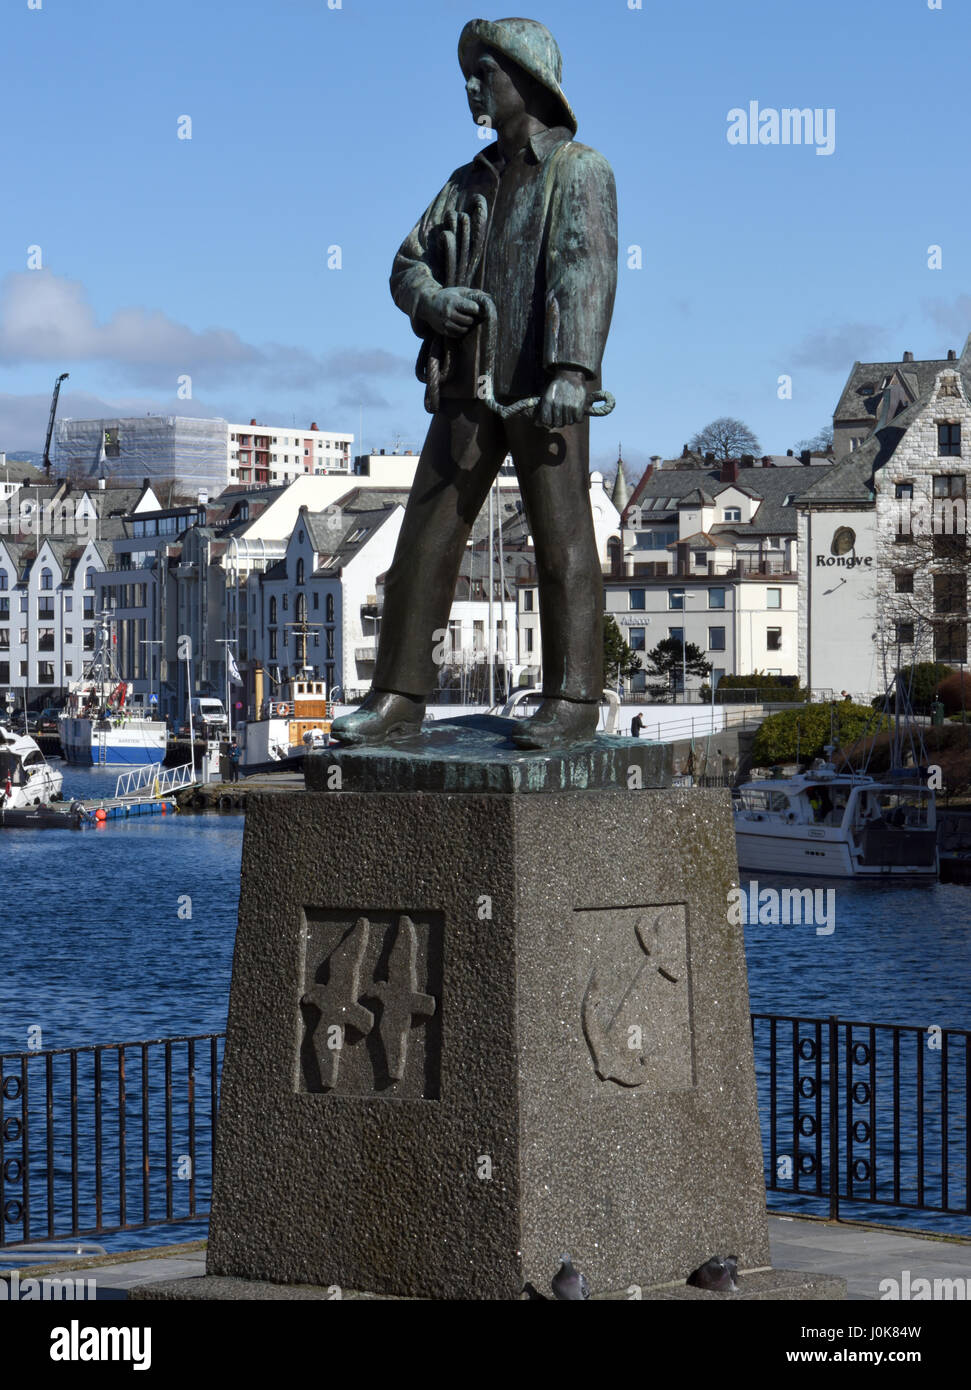 A statue on the waterfront of the harbour at  Alesund. The statue represents a young fisherman: Skårungen, the fisher boy    Ålesund, Møre og Romsdal, Stock Photo